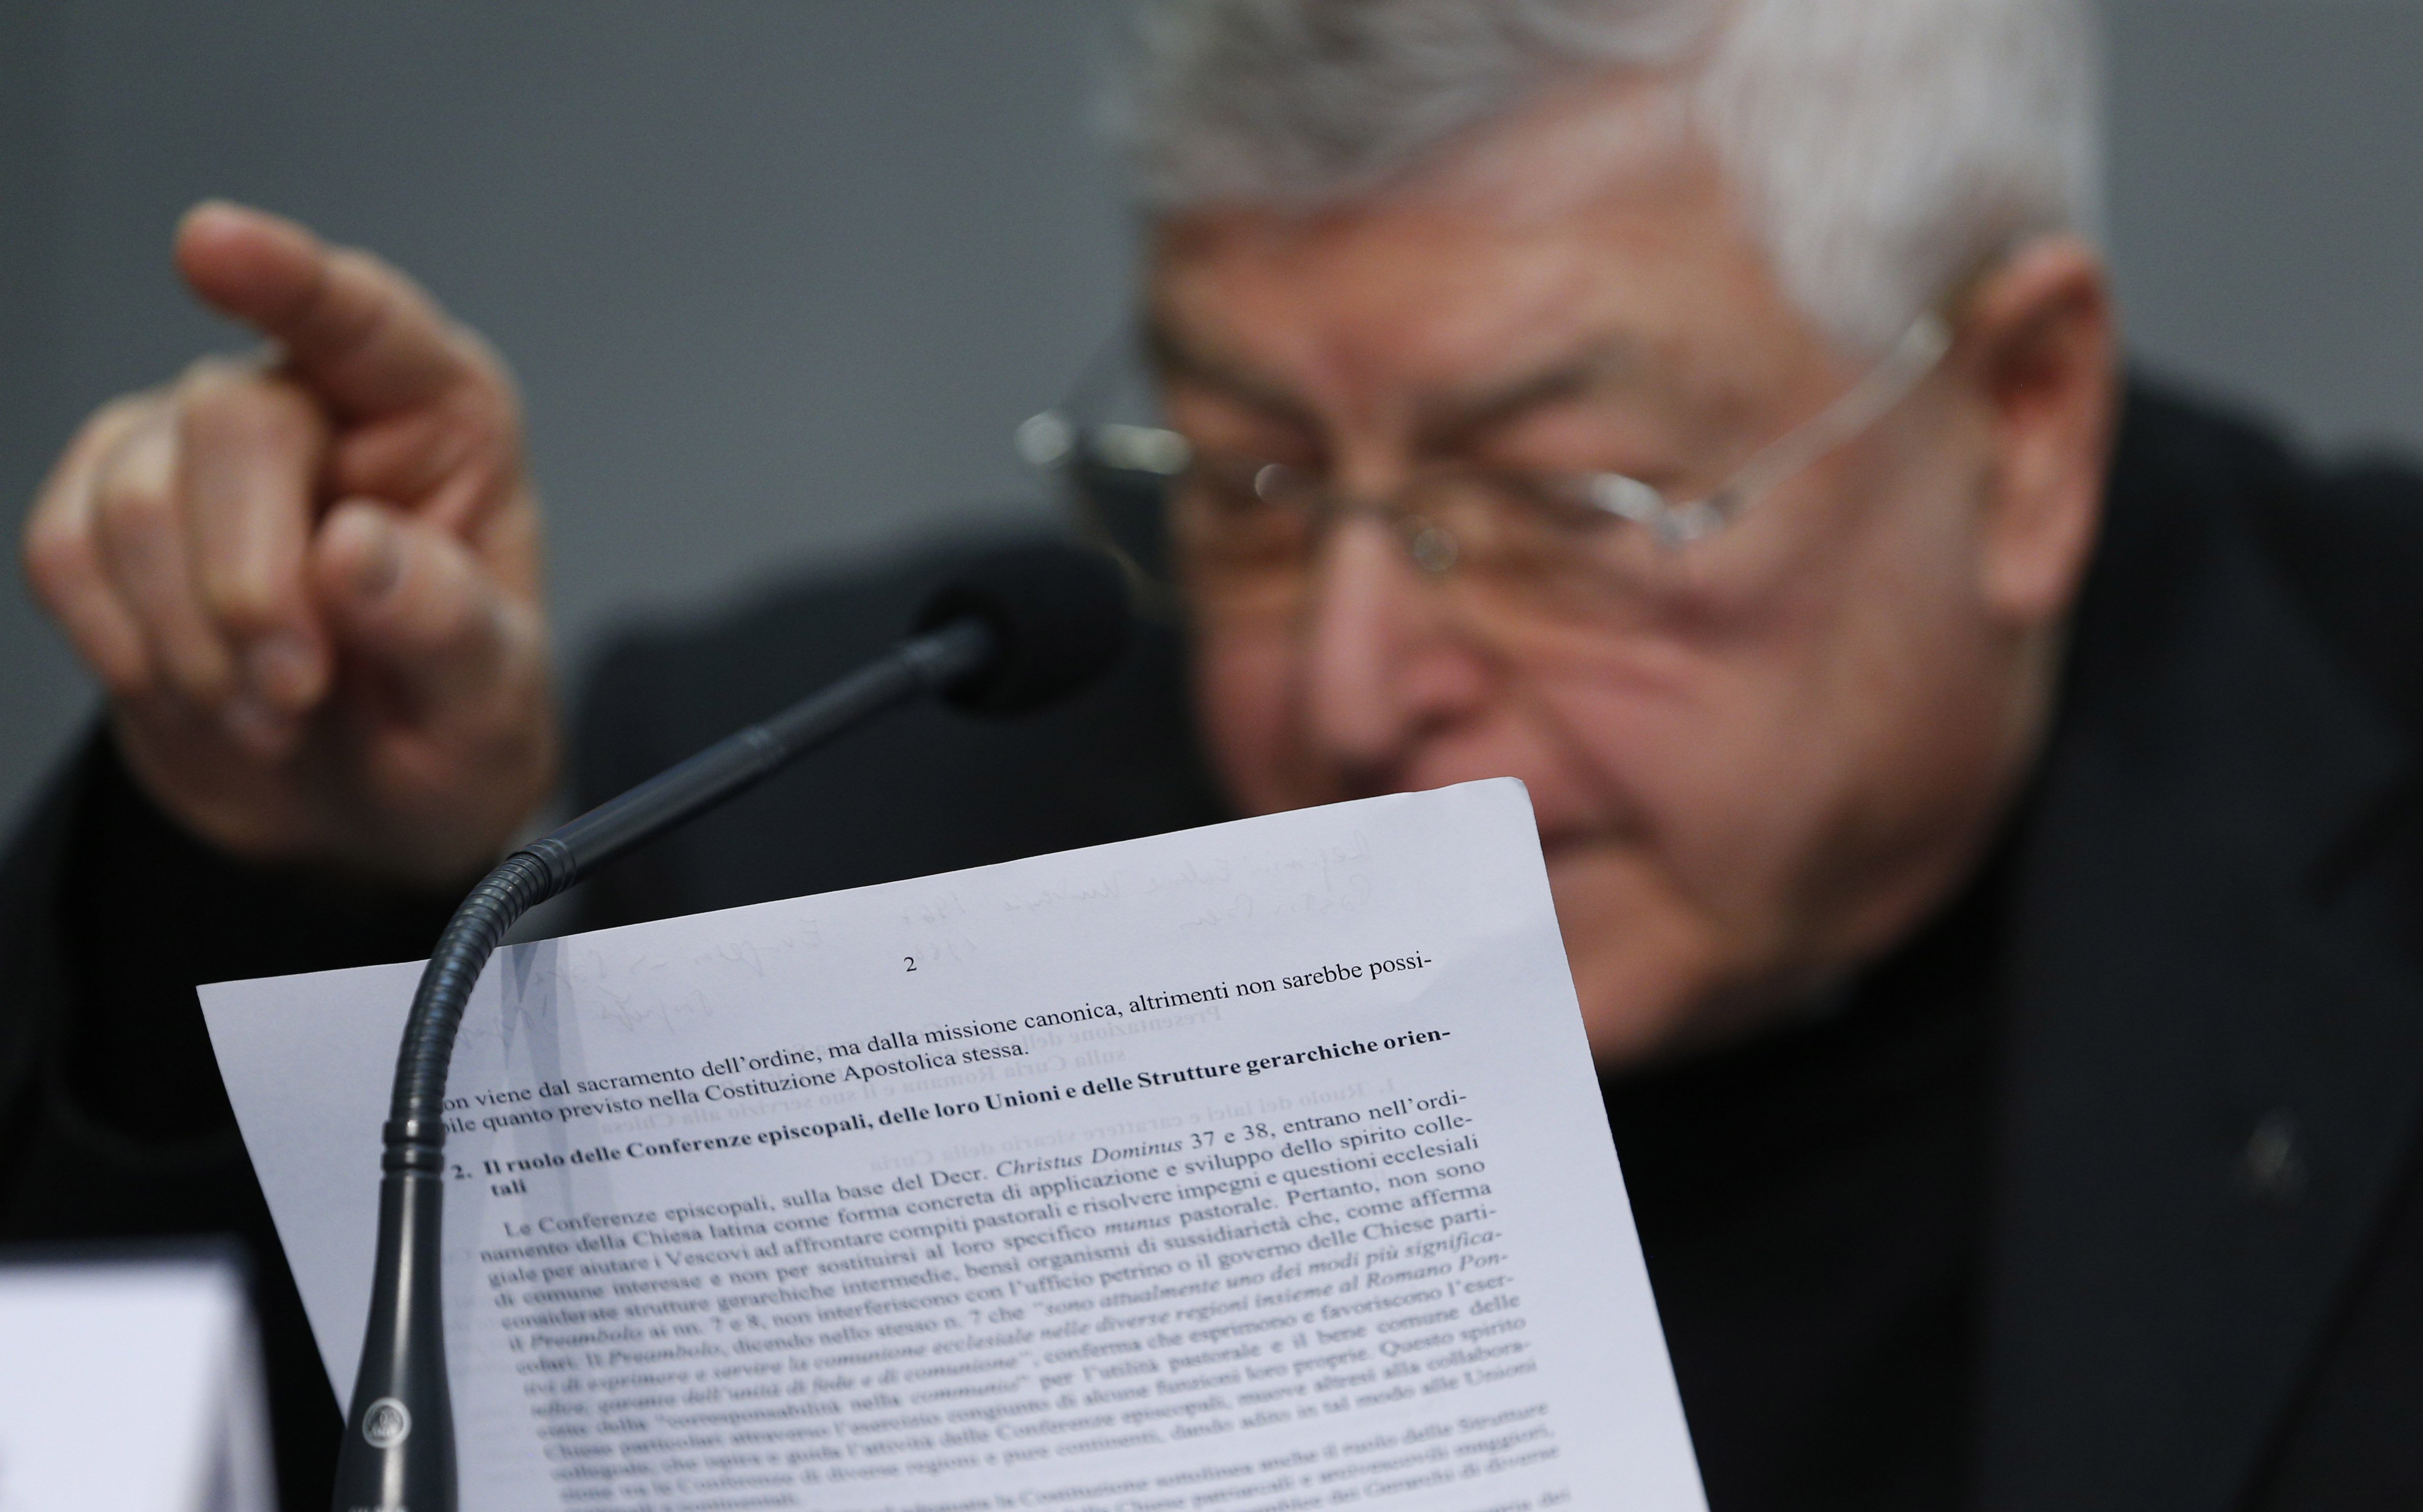 Jesuit Father Gianfranco Ghirlanda, a canon lawyer and former rector of Rome's Pontifical Gregorian University, speaks at a news conference to present Pope Francis' document, "Praedicate Evangelium" ("Preach the Gospel"), for the reform of the Roman Curia